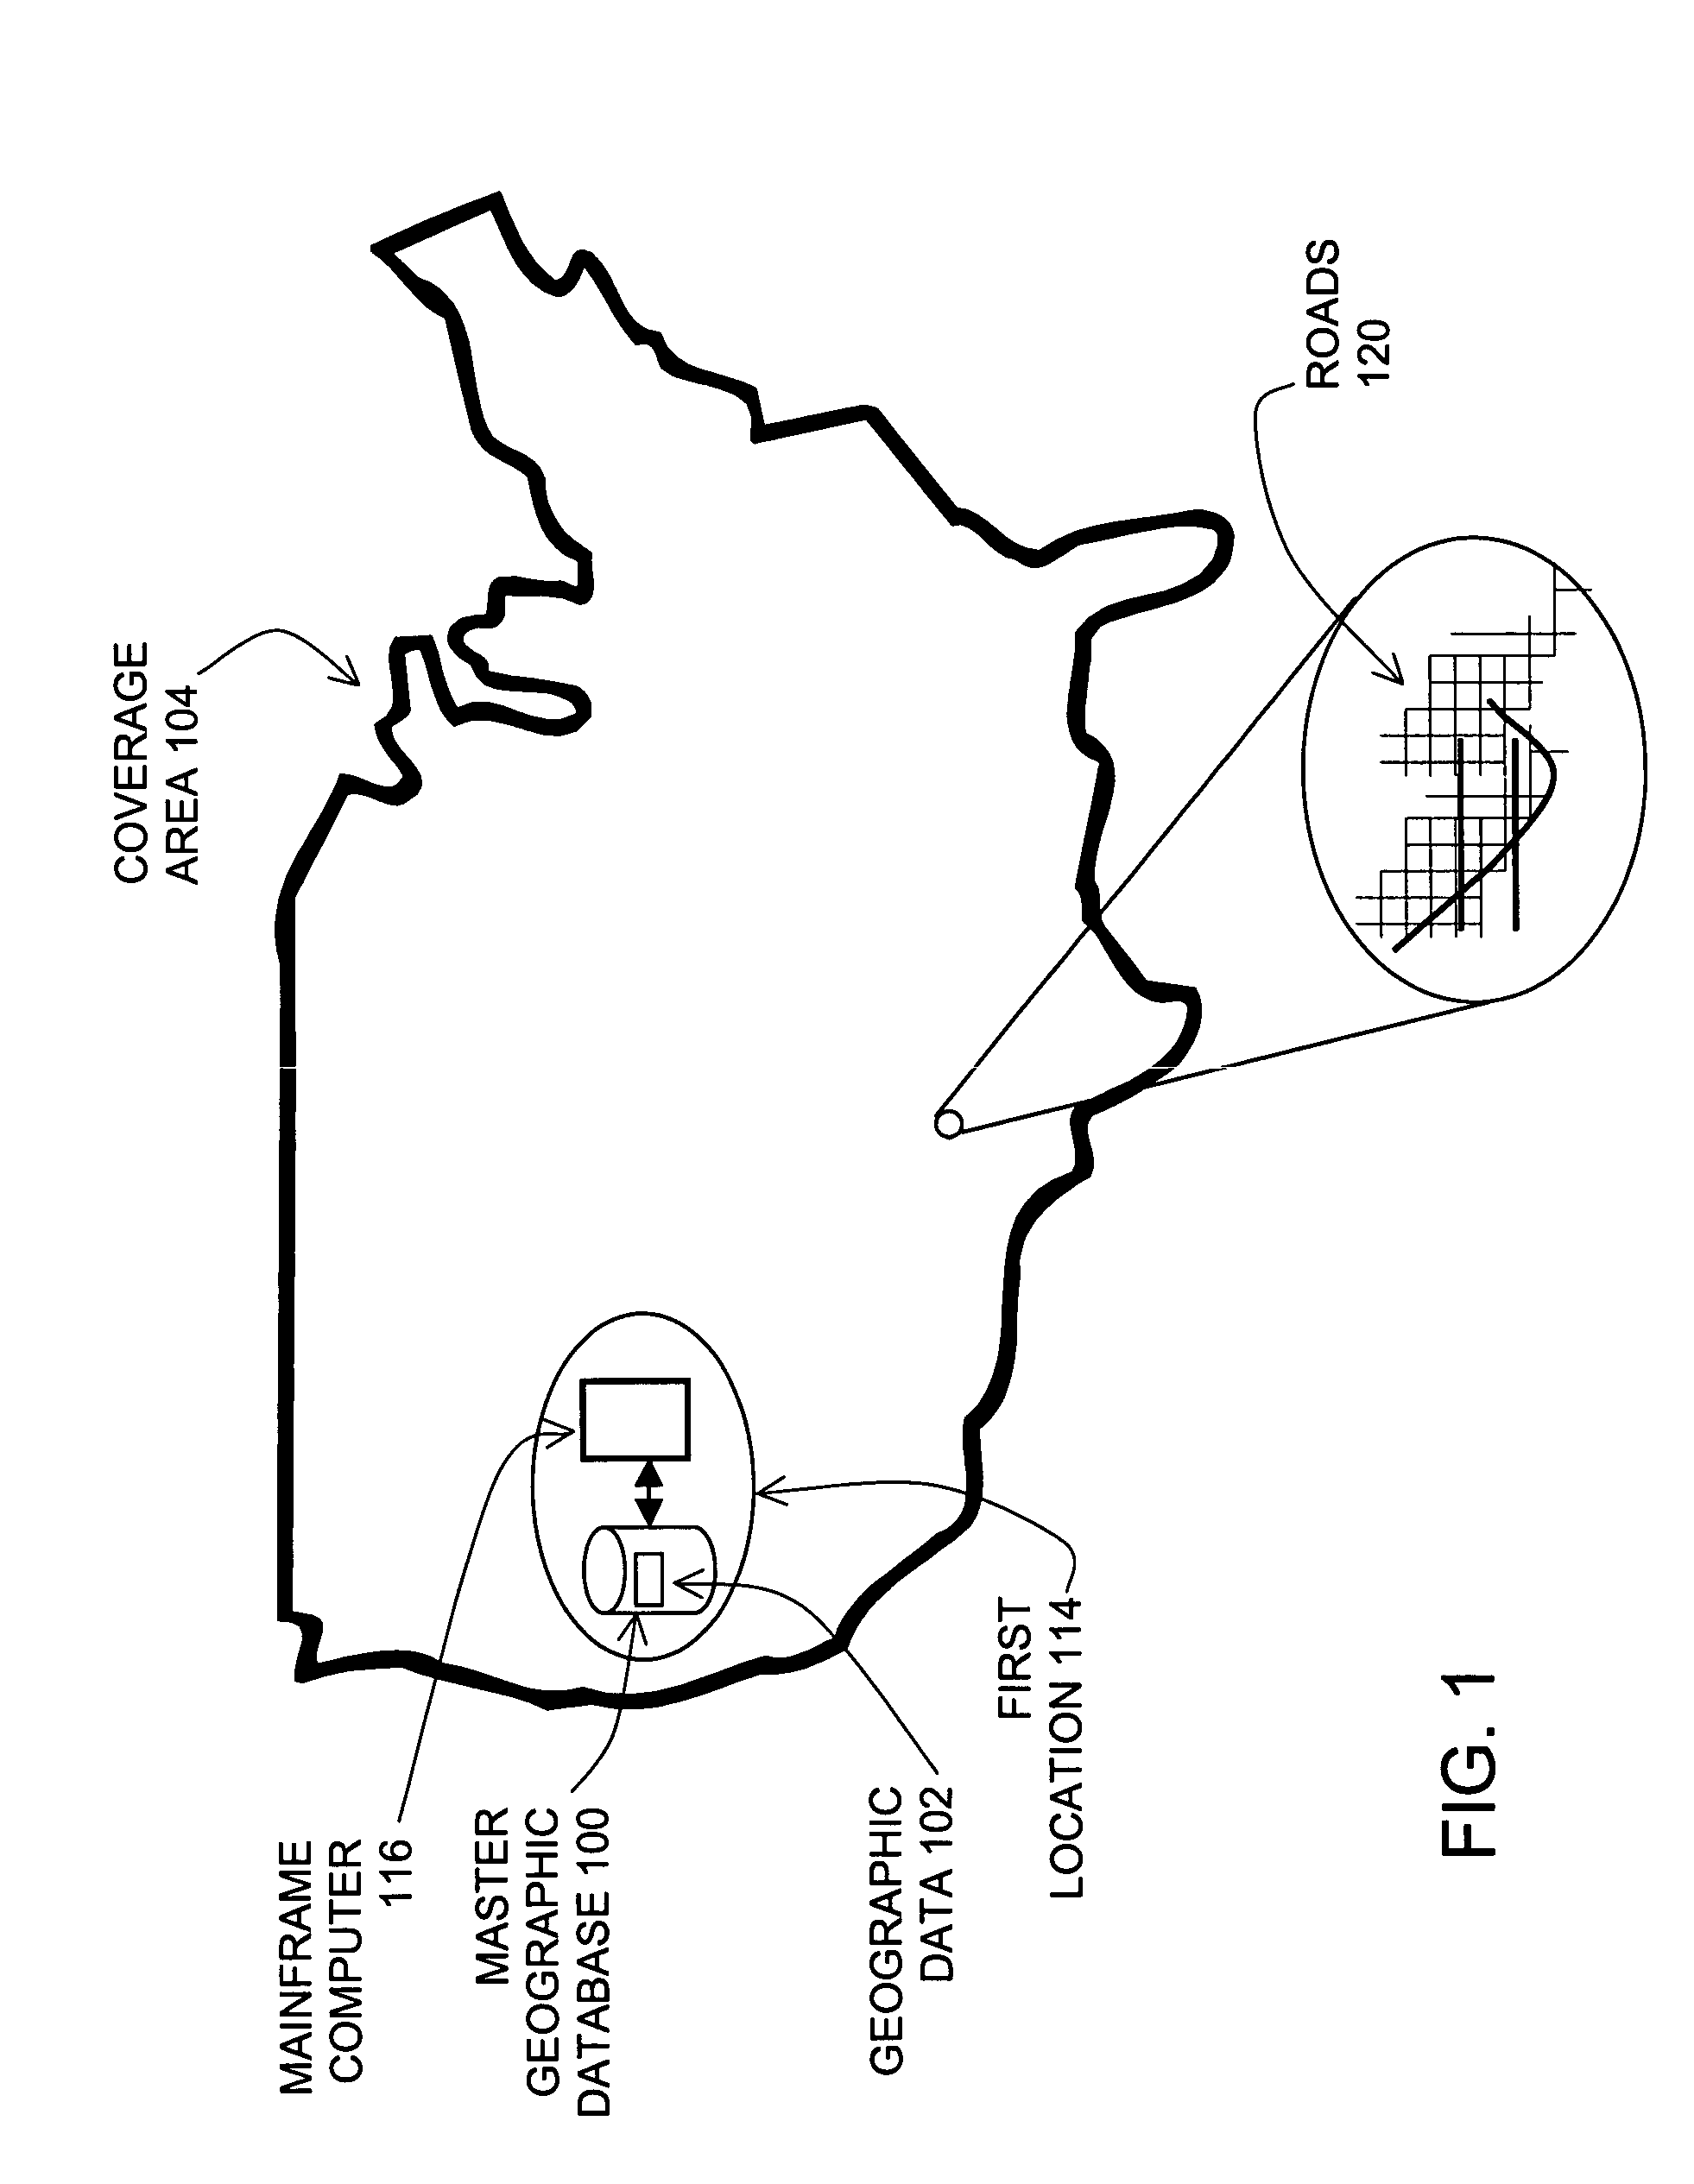 Method and system for using geographic data for developing scenes for entertainment features